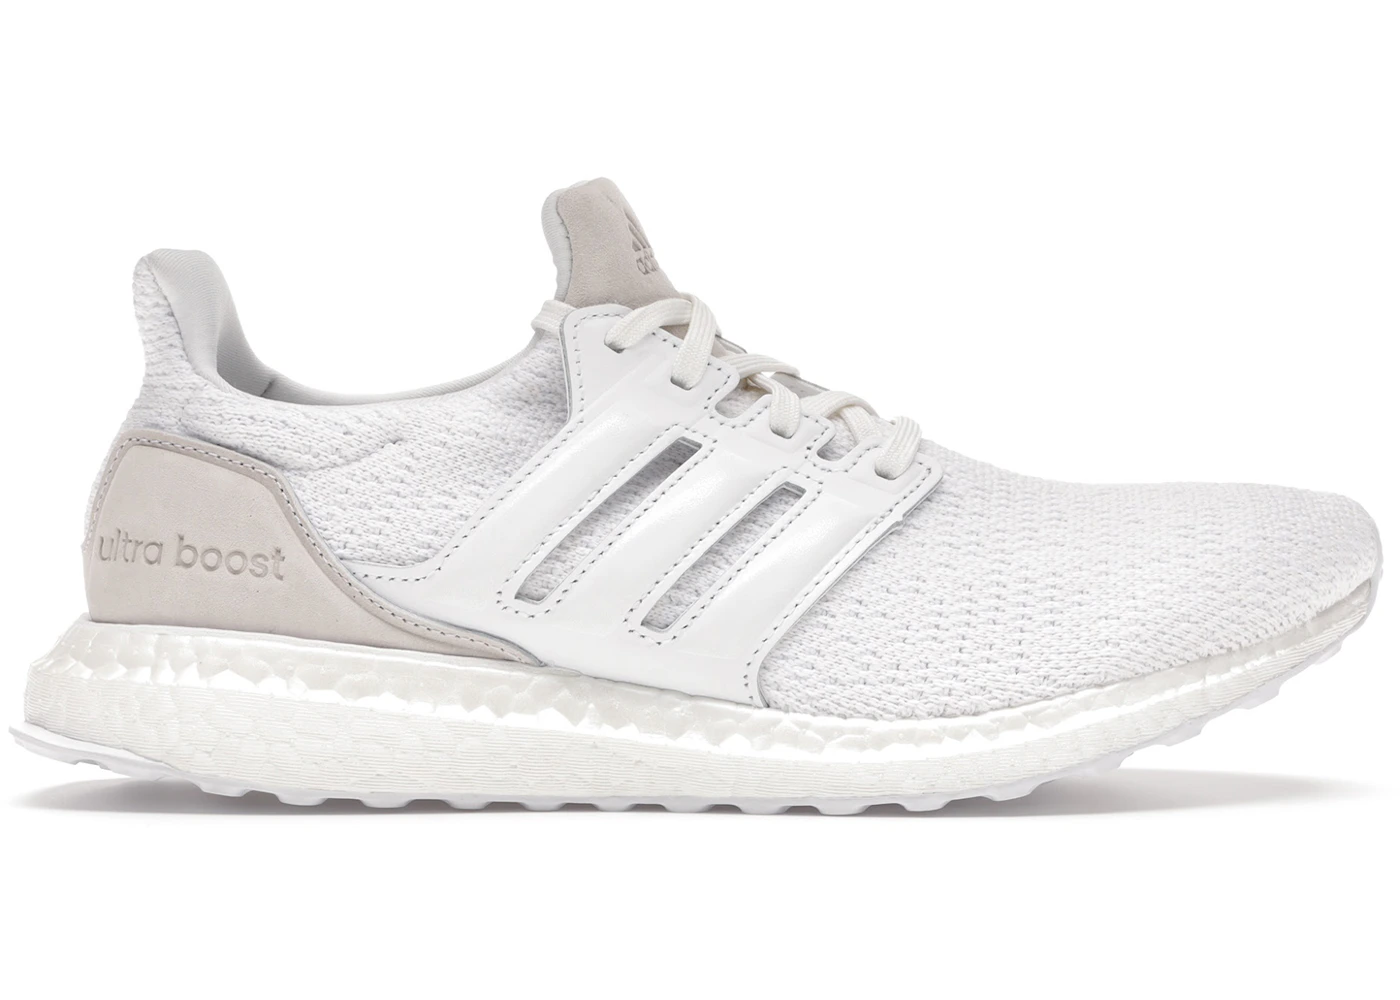 adidas Ultra Boost DNA Cloud White (Women's) - FW4901 - US